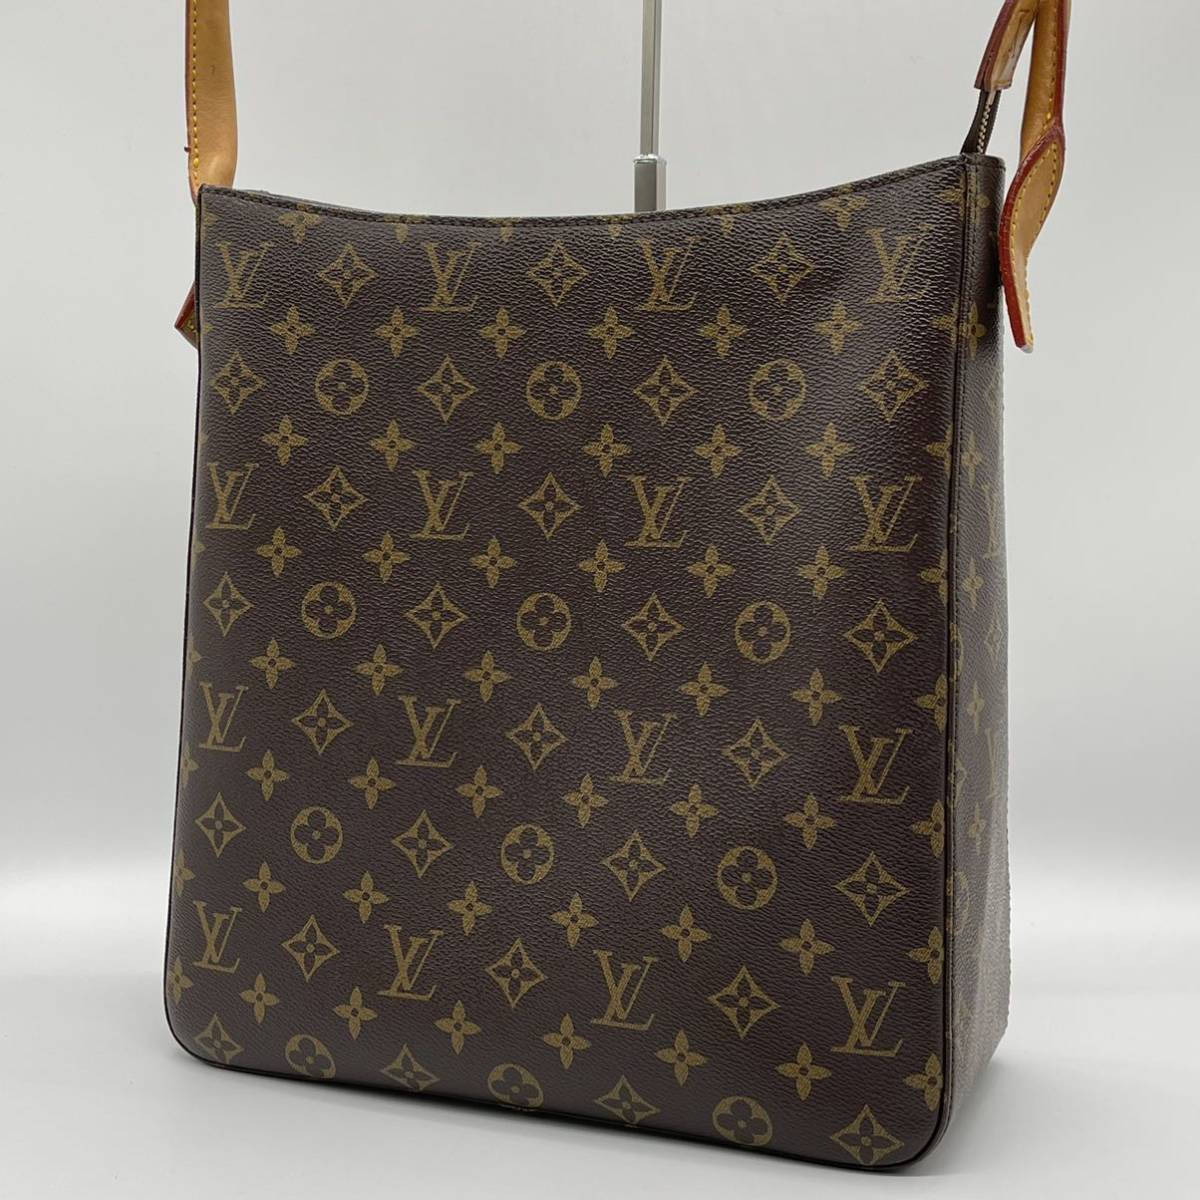 SALE／71%OFF】 LOUIS VUITTON ルイ ヴィトン ルーピング GM